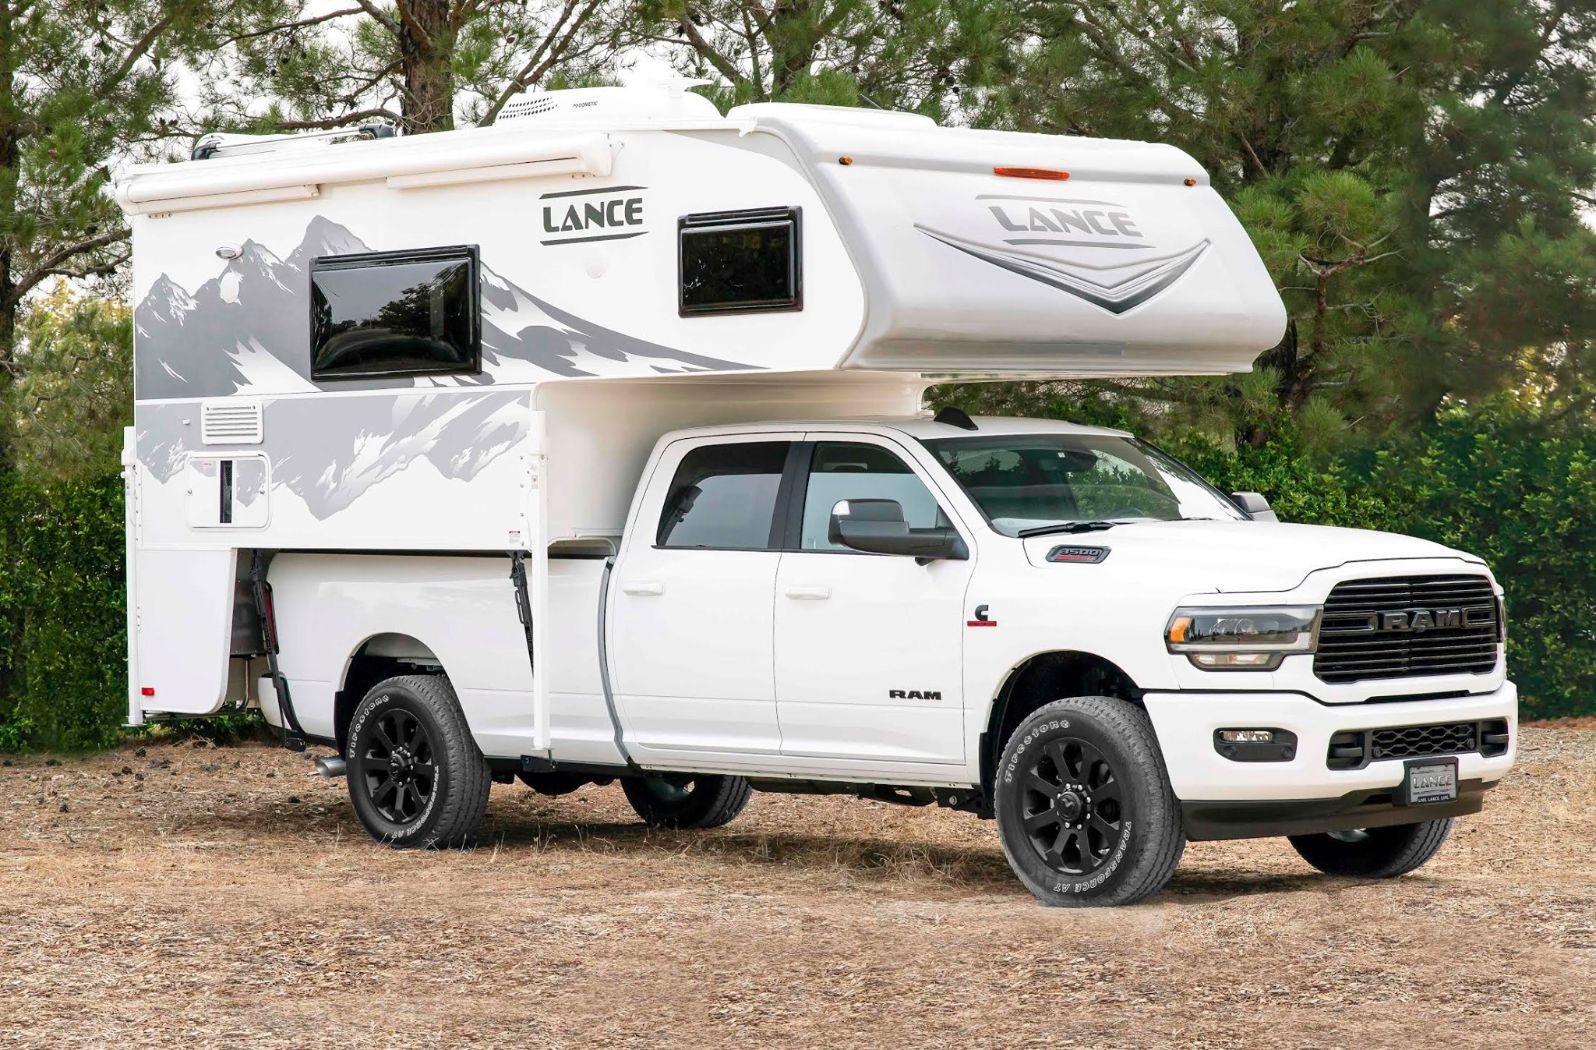 Upgrade Your Short Bed Truck With an Icarus 6 Camper and Rid